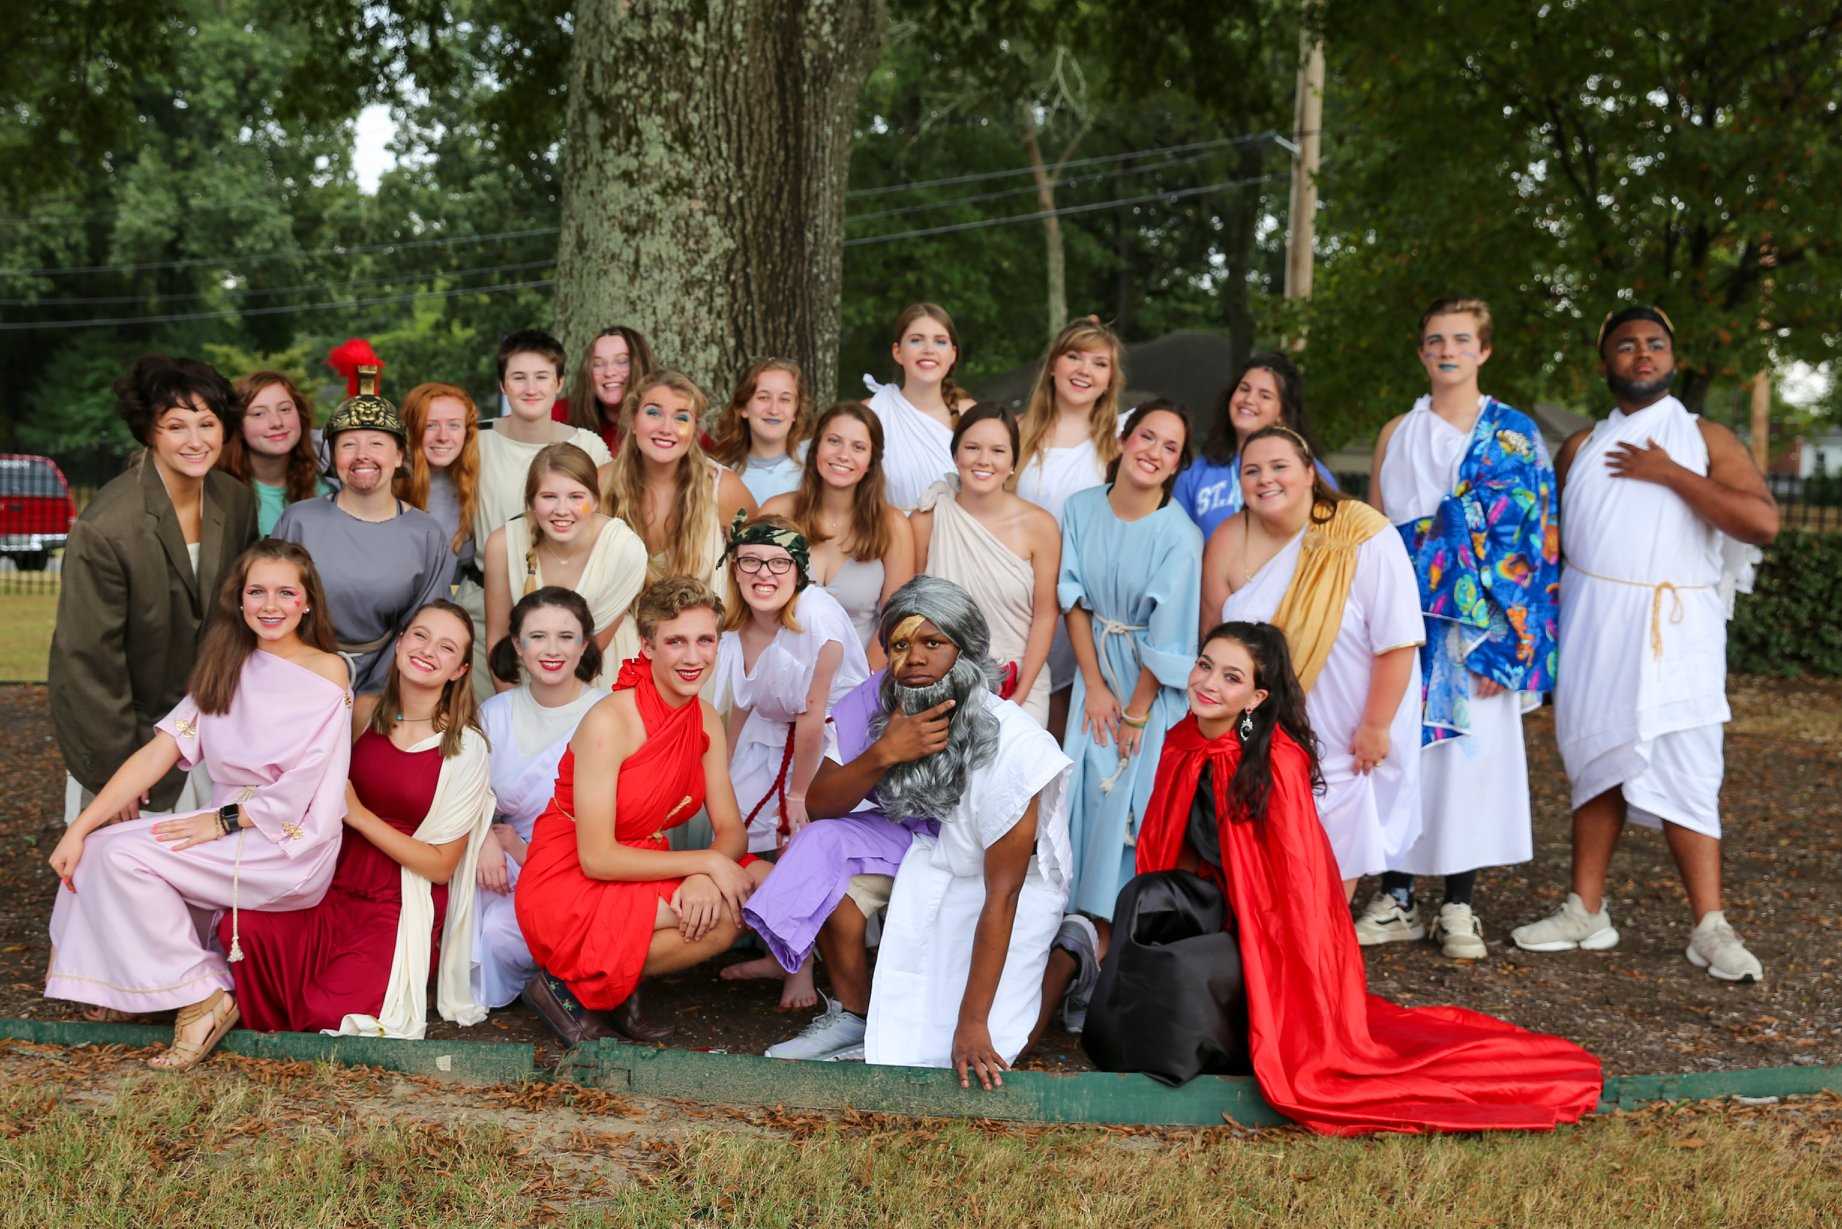 Theatre Department Presents The Iliad, the Odyssey, and All of Greek Mythology in 99 Minutes or Less